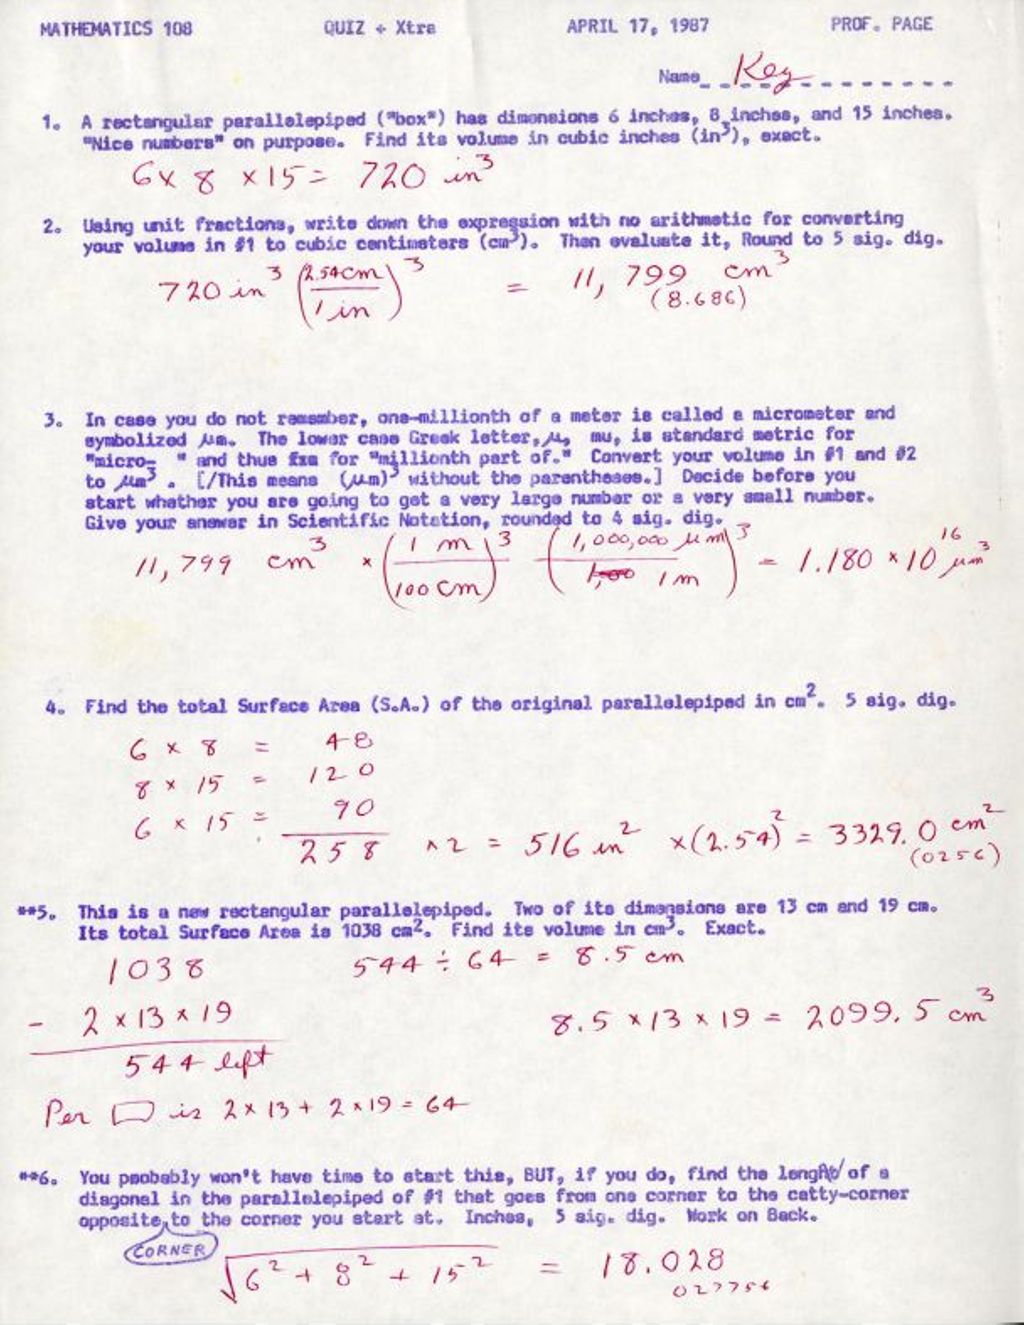 Miniature of Math 108 Quiz + Xtra (1987) “A rectangular Parallelelipiped . .” w/ Answer Key notes from DP